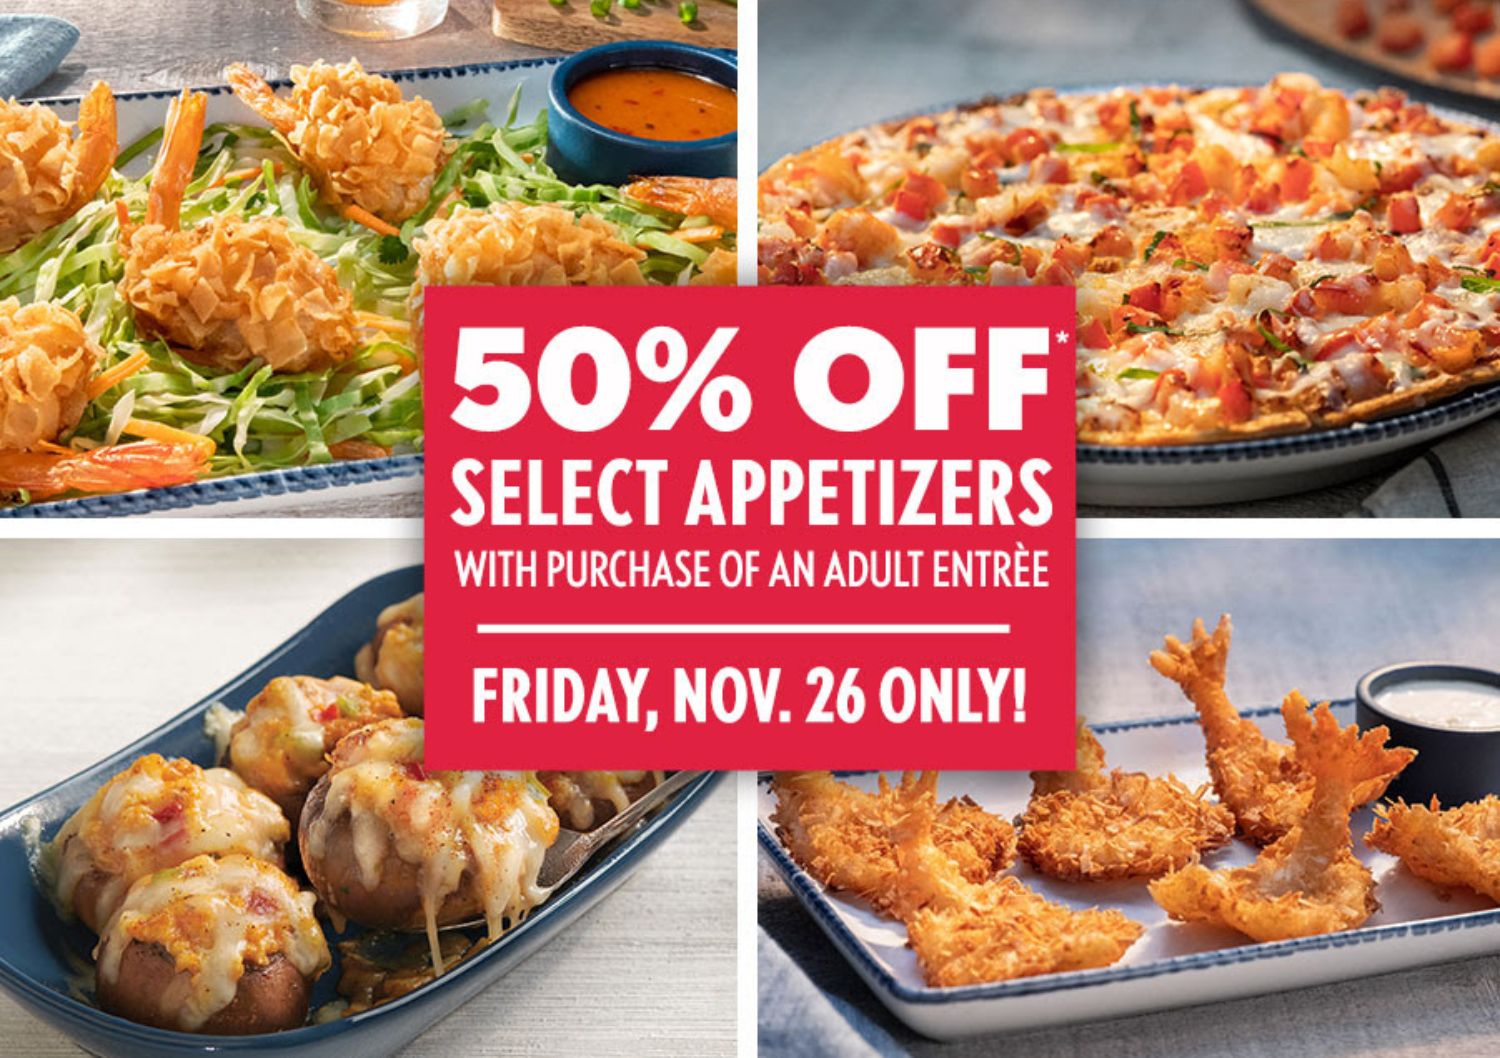 Red Lobster Offers 50% Off a Select Appetizer with an Online Adult Entree Purchase in Florida and Texas this Black Friday